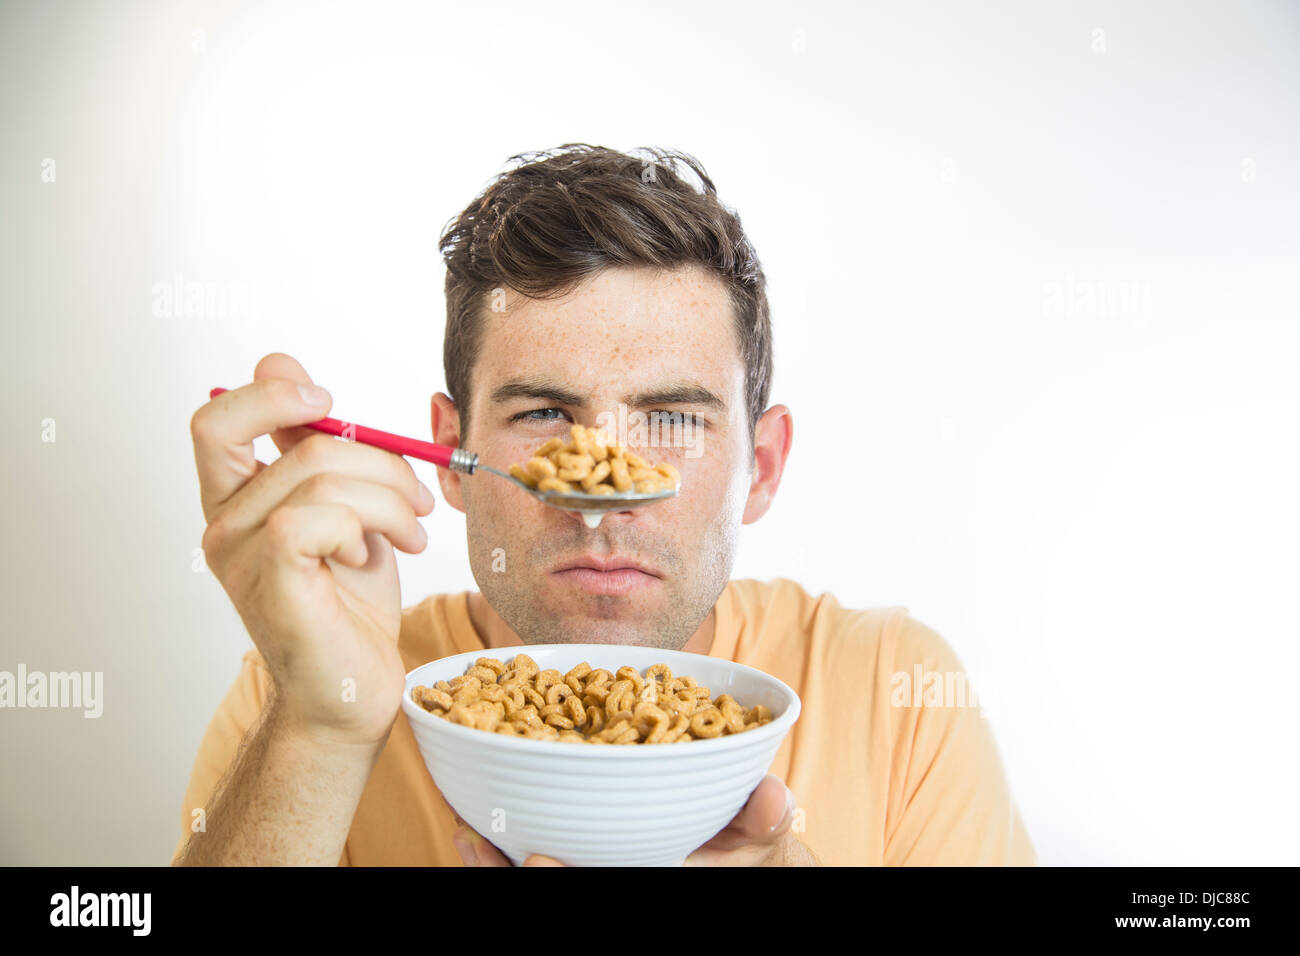 Man eating cereal Stock Photo